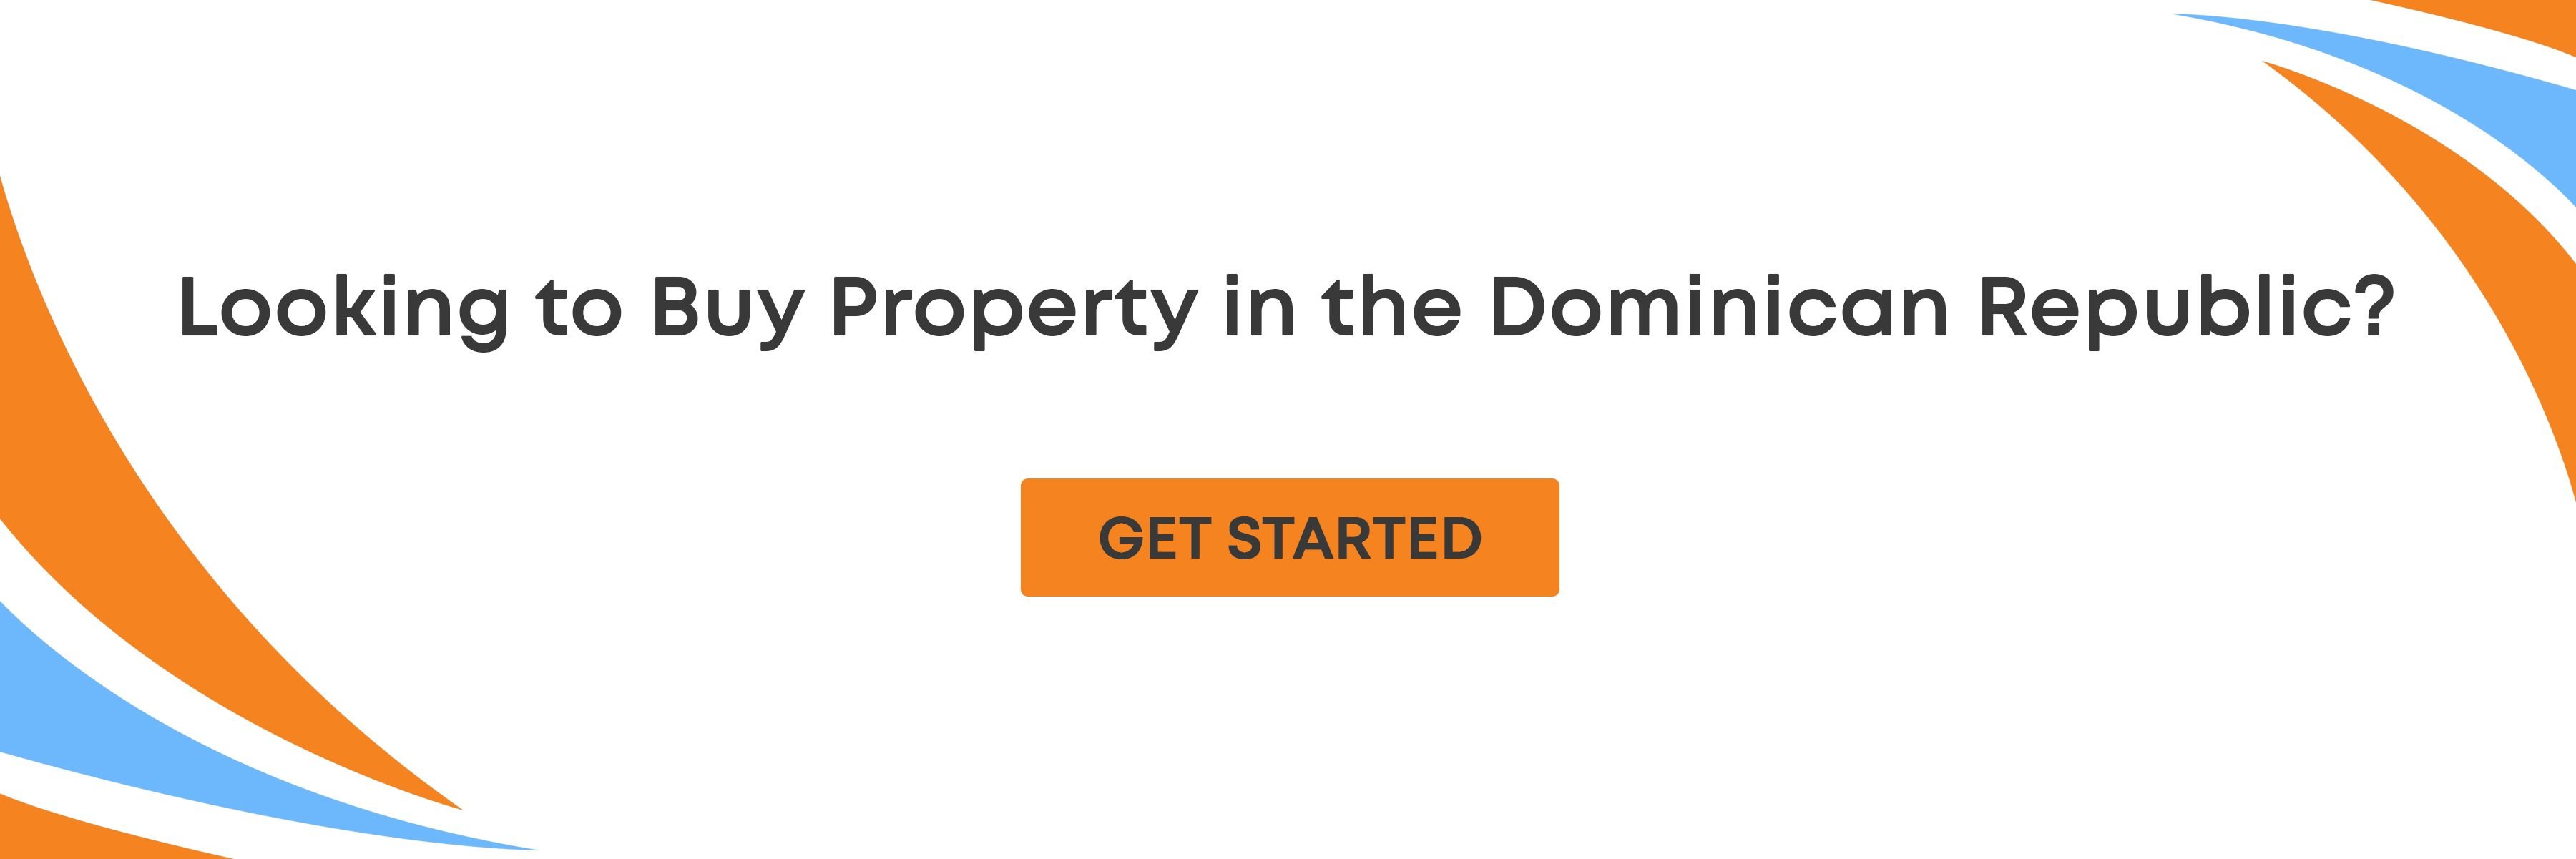 Dominican Republic Property Purchase